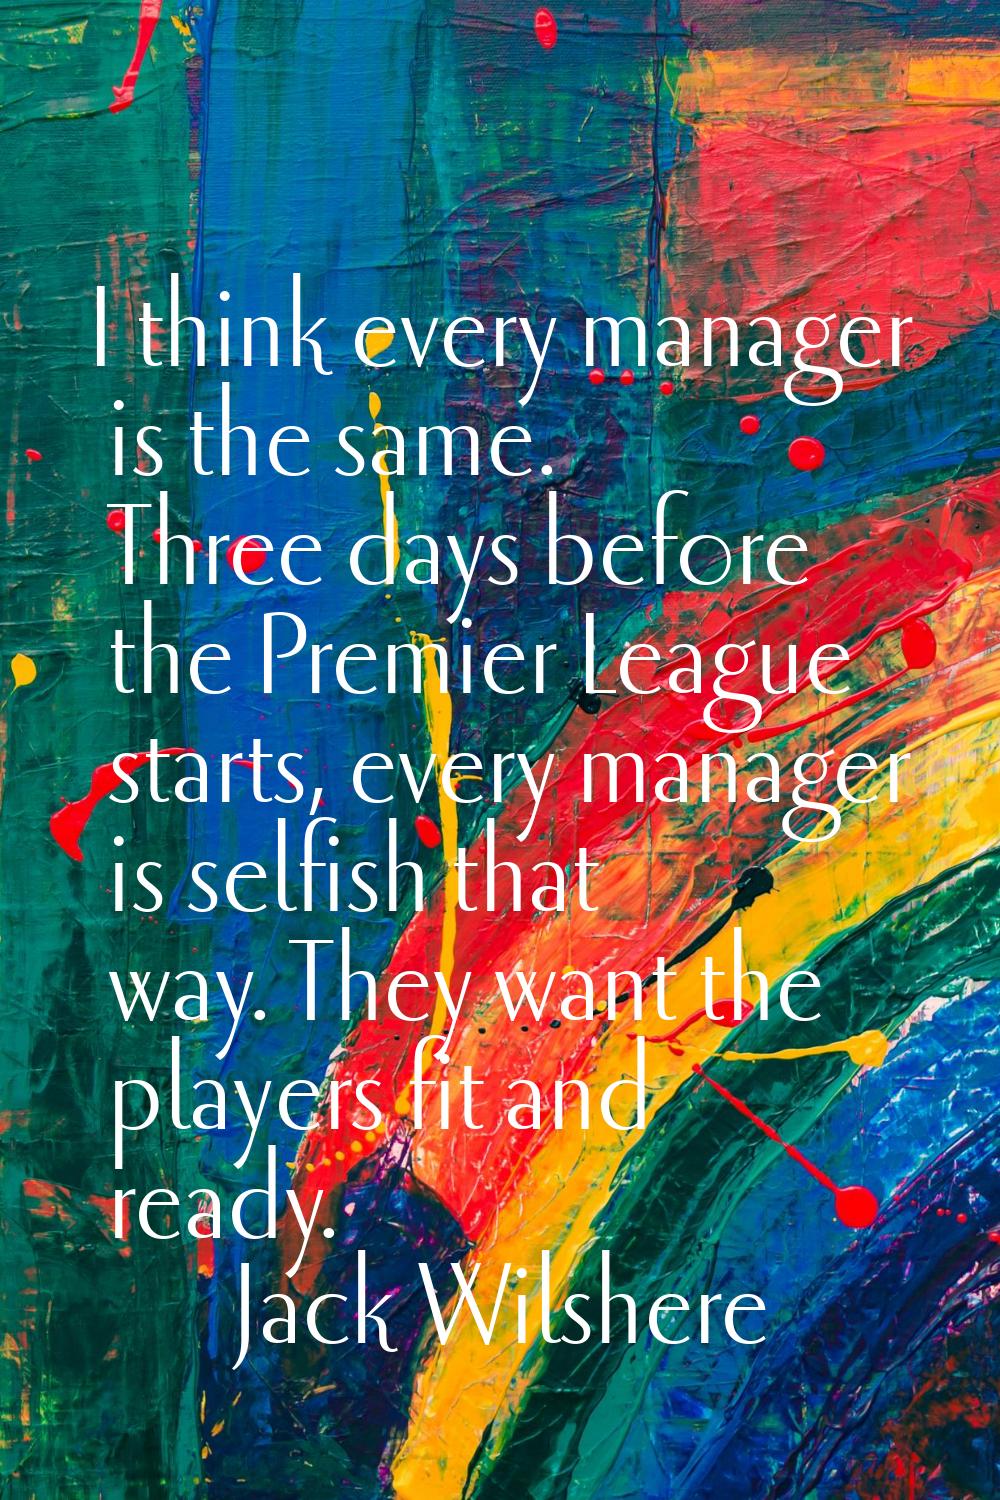 I think every manager is the same. Three days before the Premier League starts, every manager is se